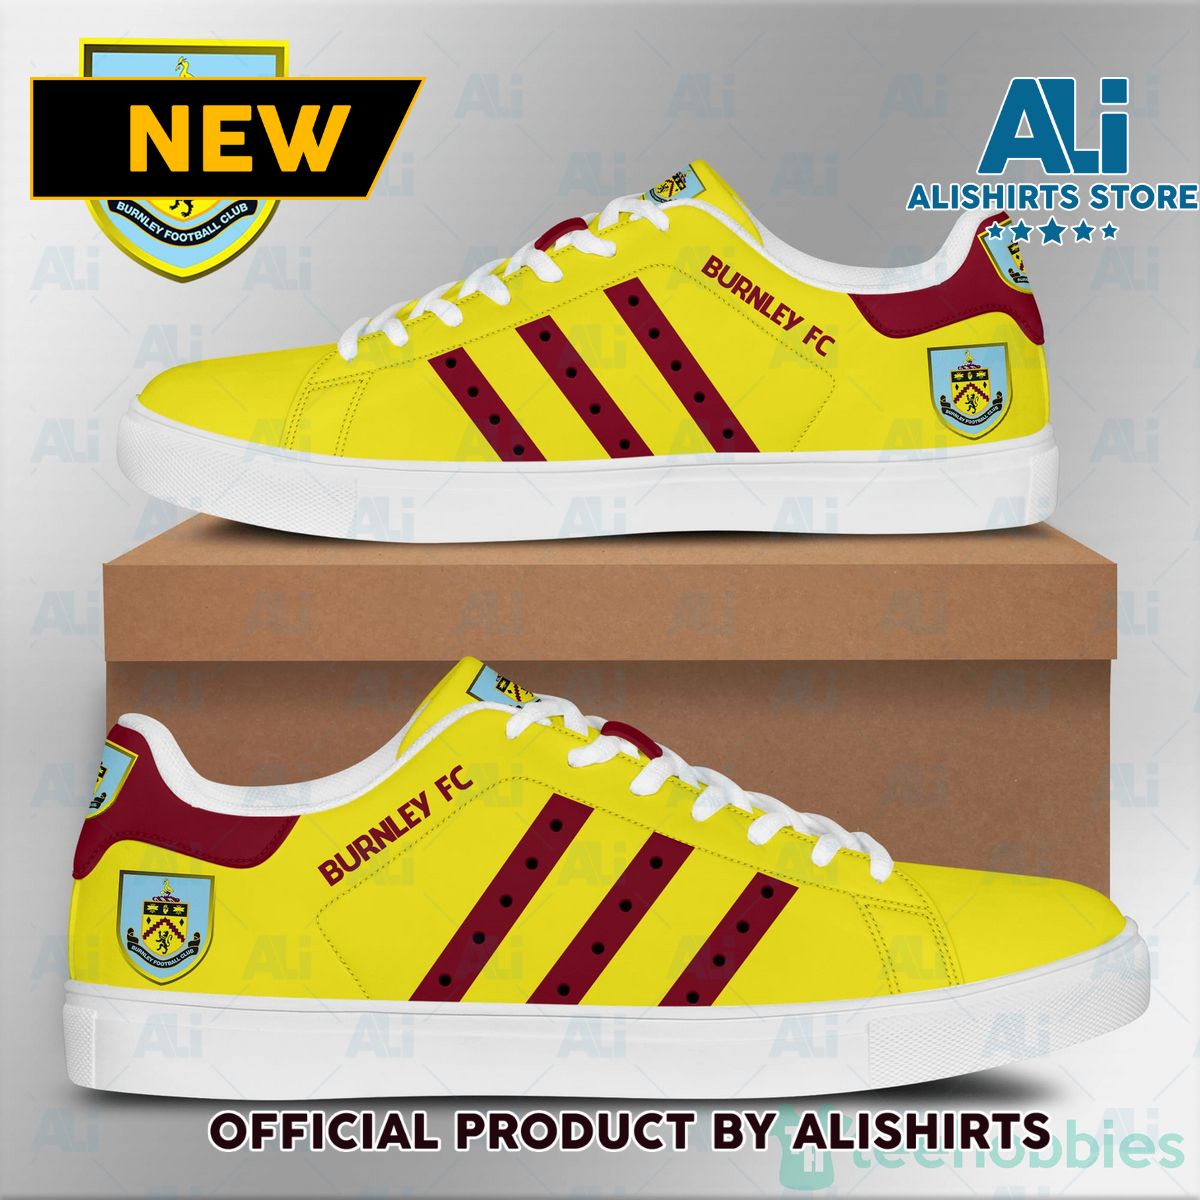 Burnley F.C Yellow Adidas Stan Smith Low Top Skate Shoes